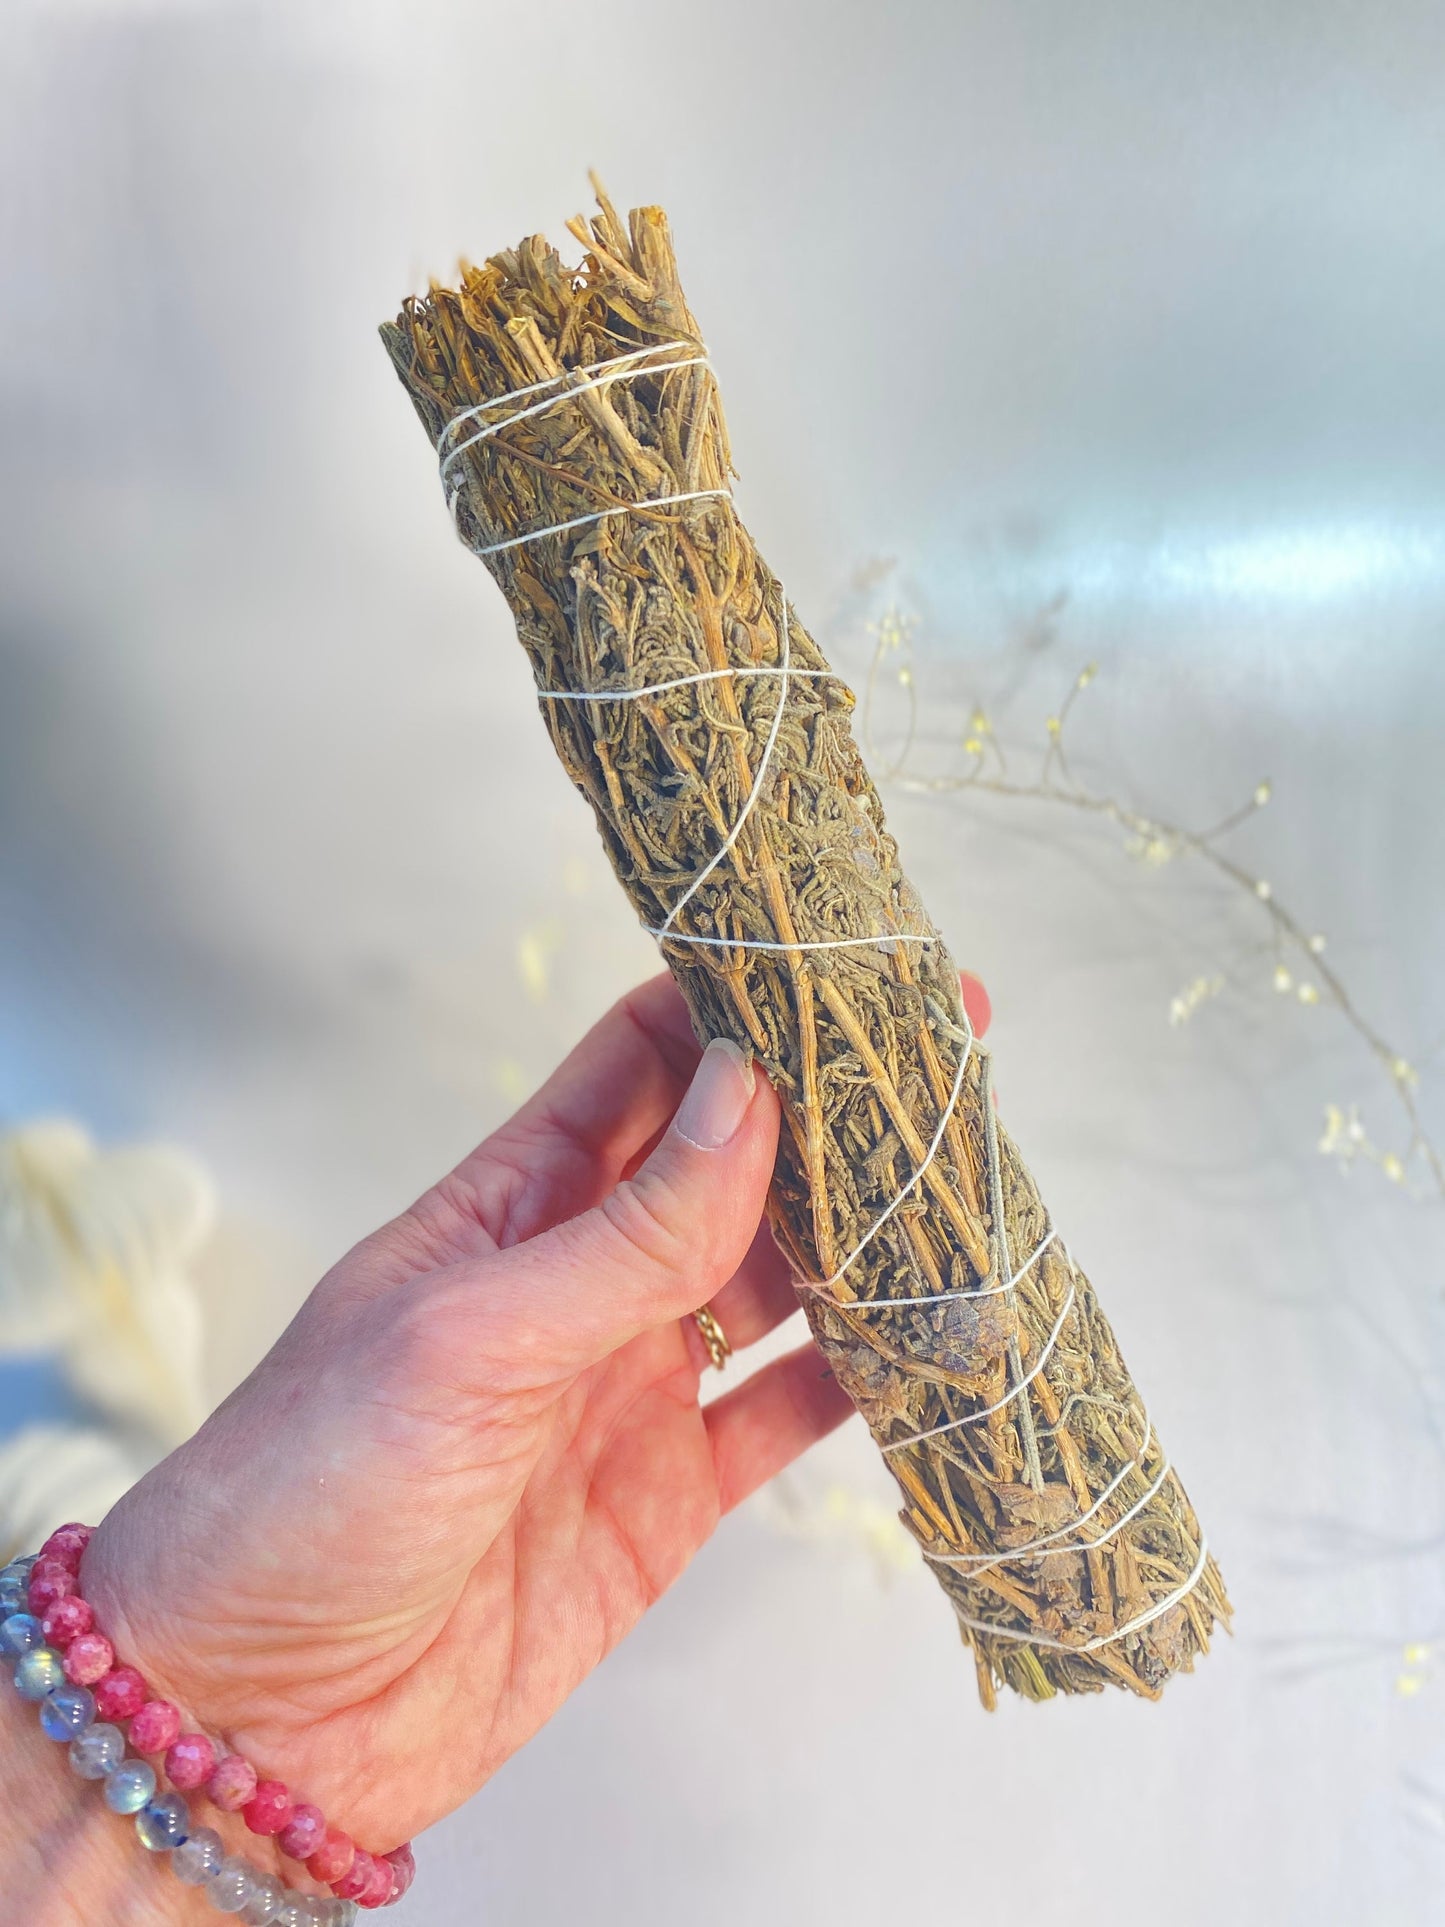 Lavender Sage, Extra large, Smudge Stick, Cleanse energy, crystals, your home and you. House warming gift.